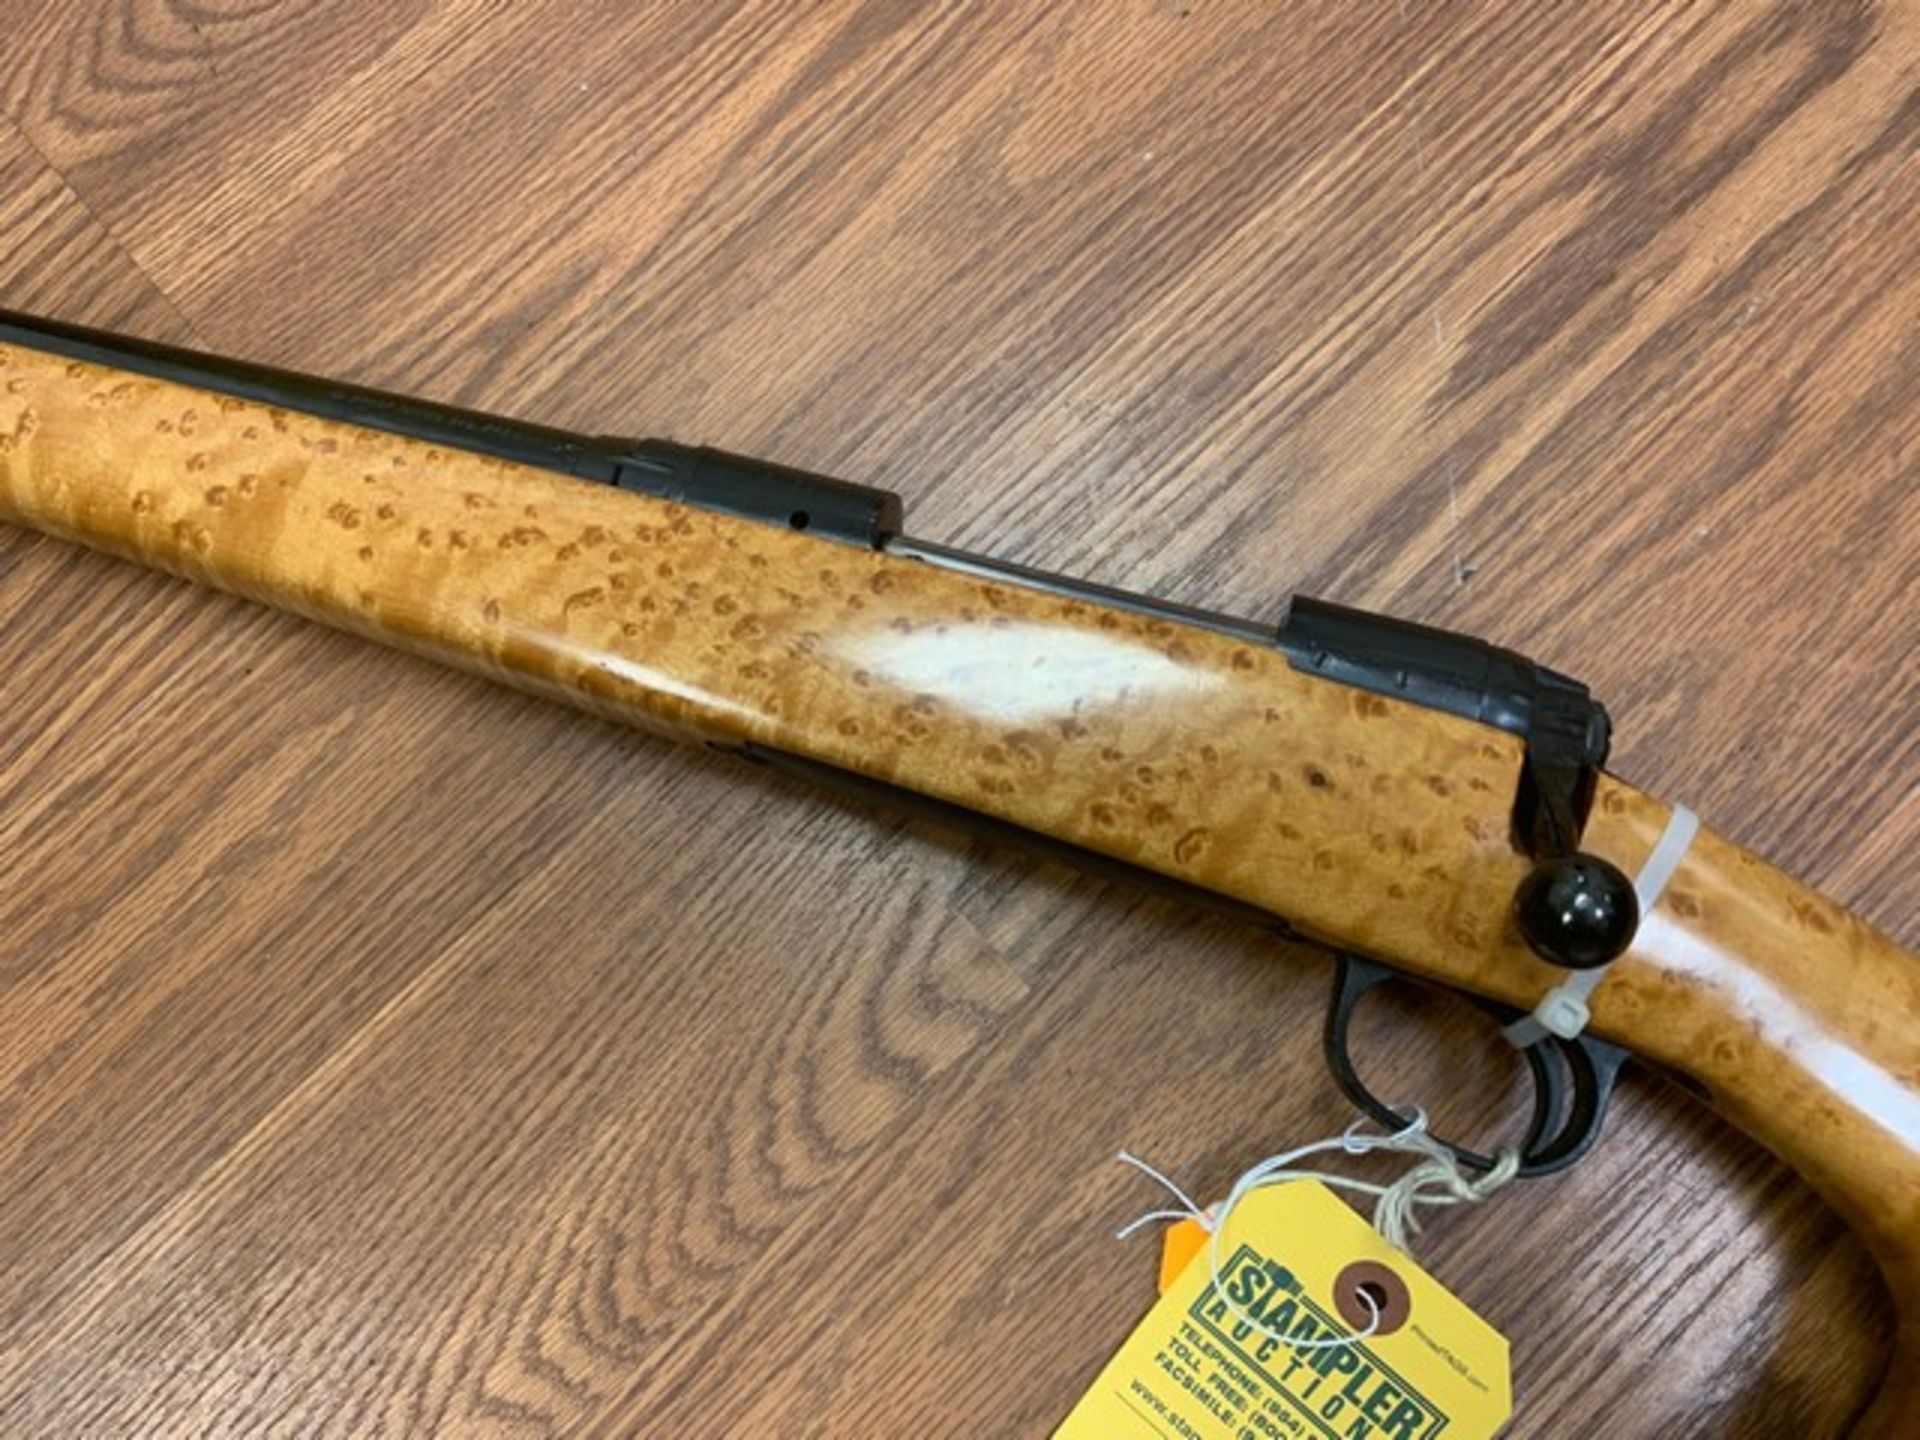 SAVAGE 110L-H PISTOL - 243 WIN - LEFT HAND BOLT ACTION - BIRDS EYE MAPLE (FOB HOLLYWOOD, FL) - Image 3 of 7